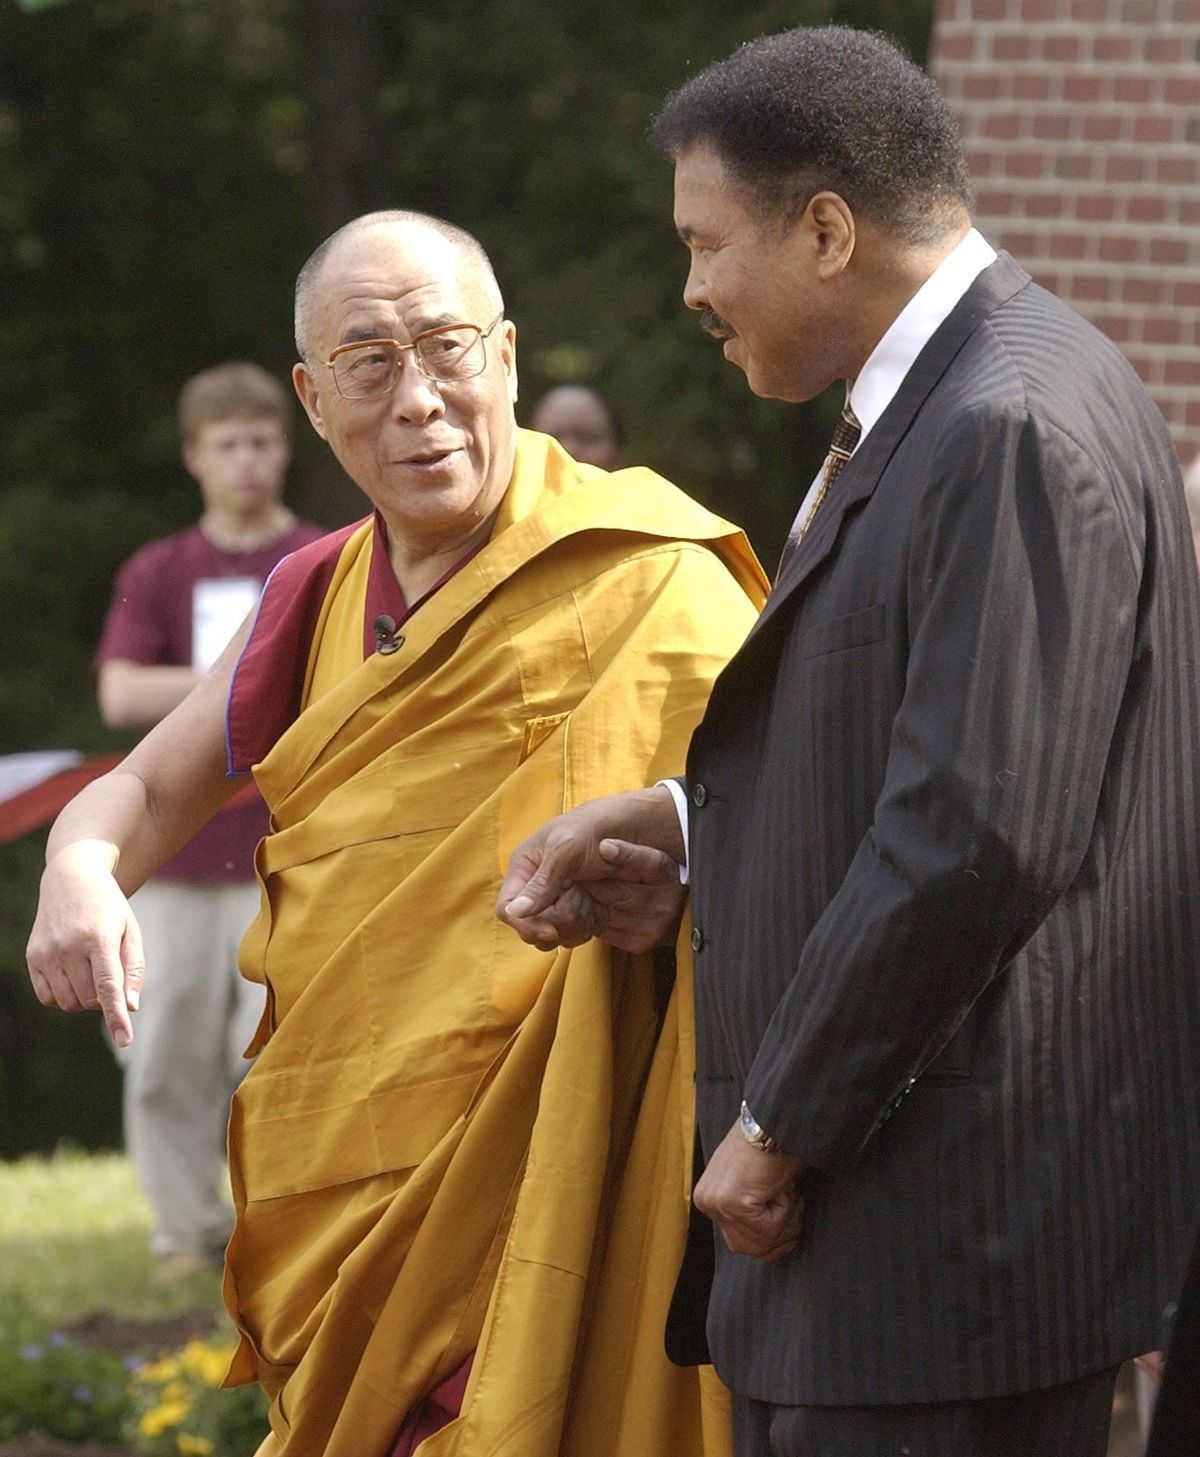 The Dalai Lama walks with Ali as they move towards a new interfaith temple at the Tibetan Cultural Center in Bloomington, Indiana, 2003.